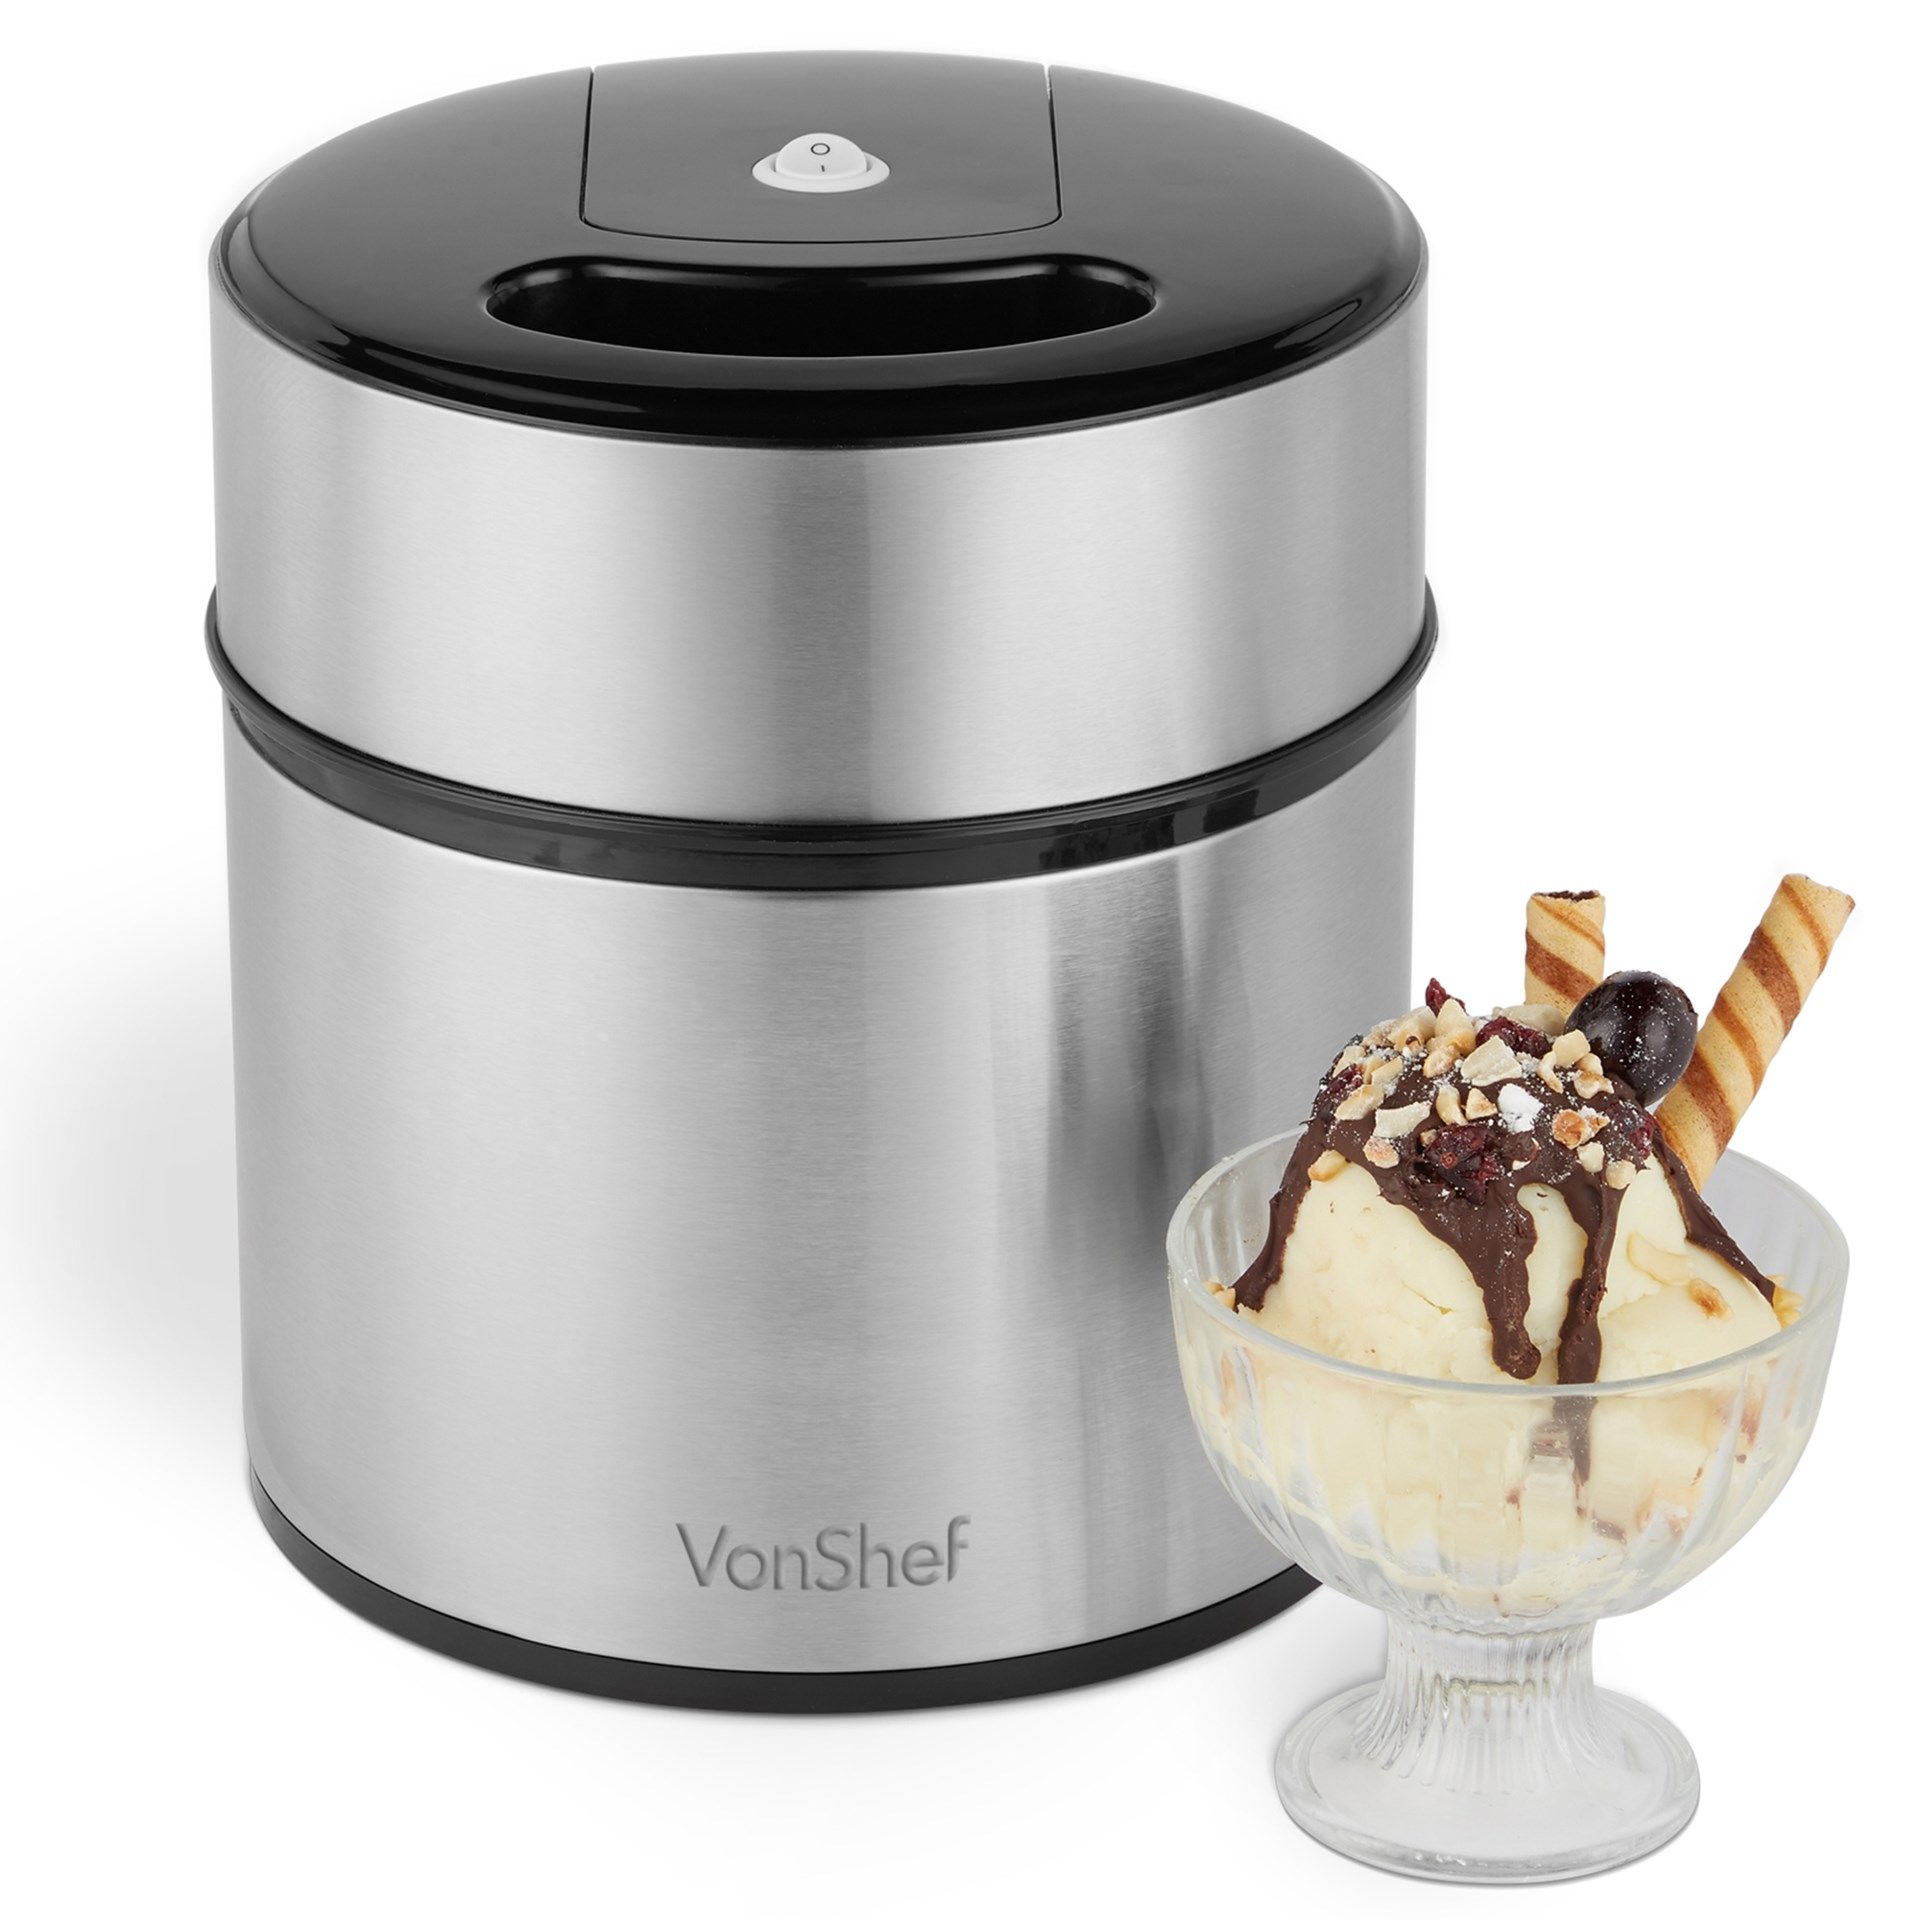 (S297) Stainless Steel Ice Cream Maker Machine with Detachable Bowl 2L Capacity TASTY HOMEMADE ... - Image 2 of 4